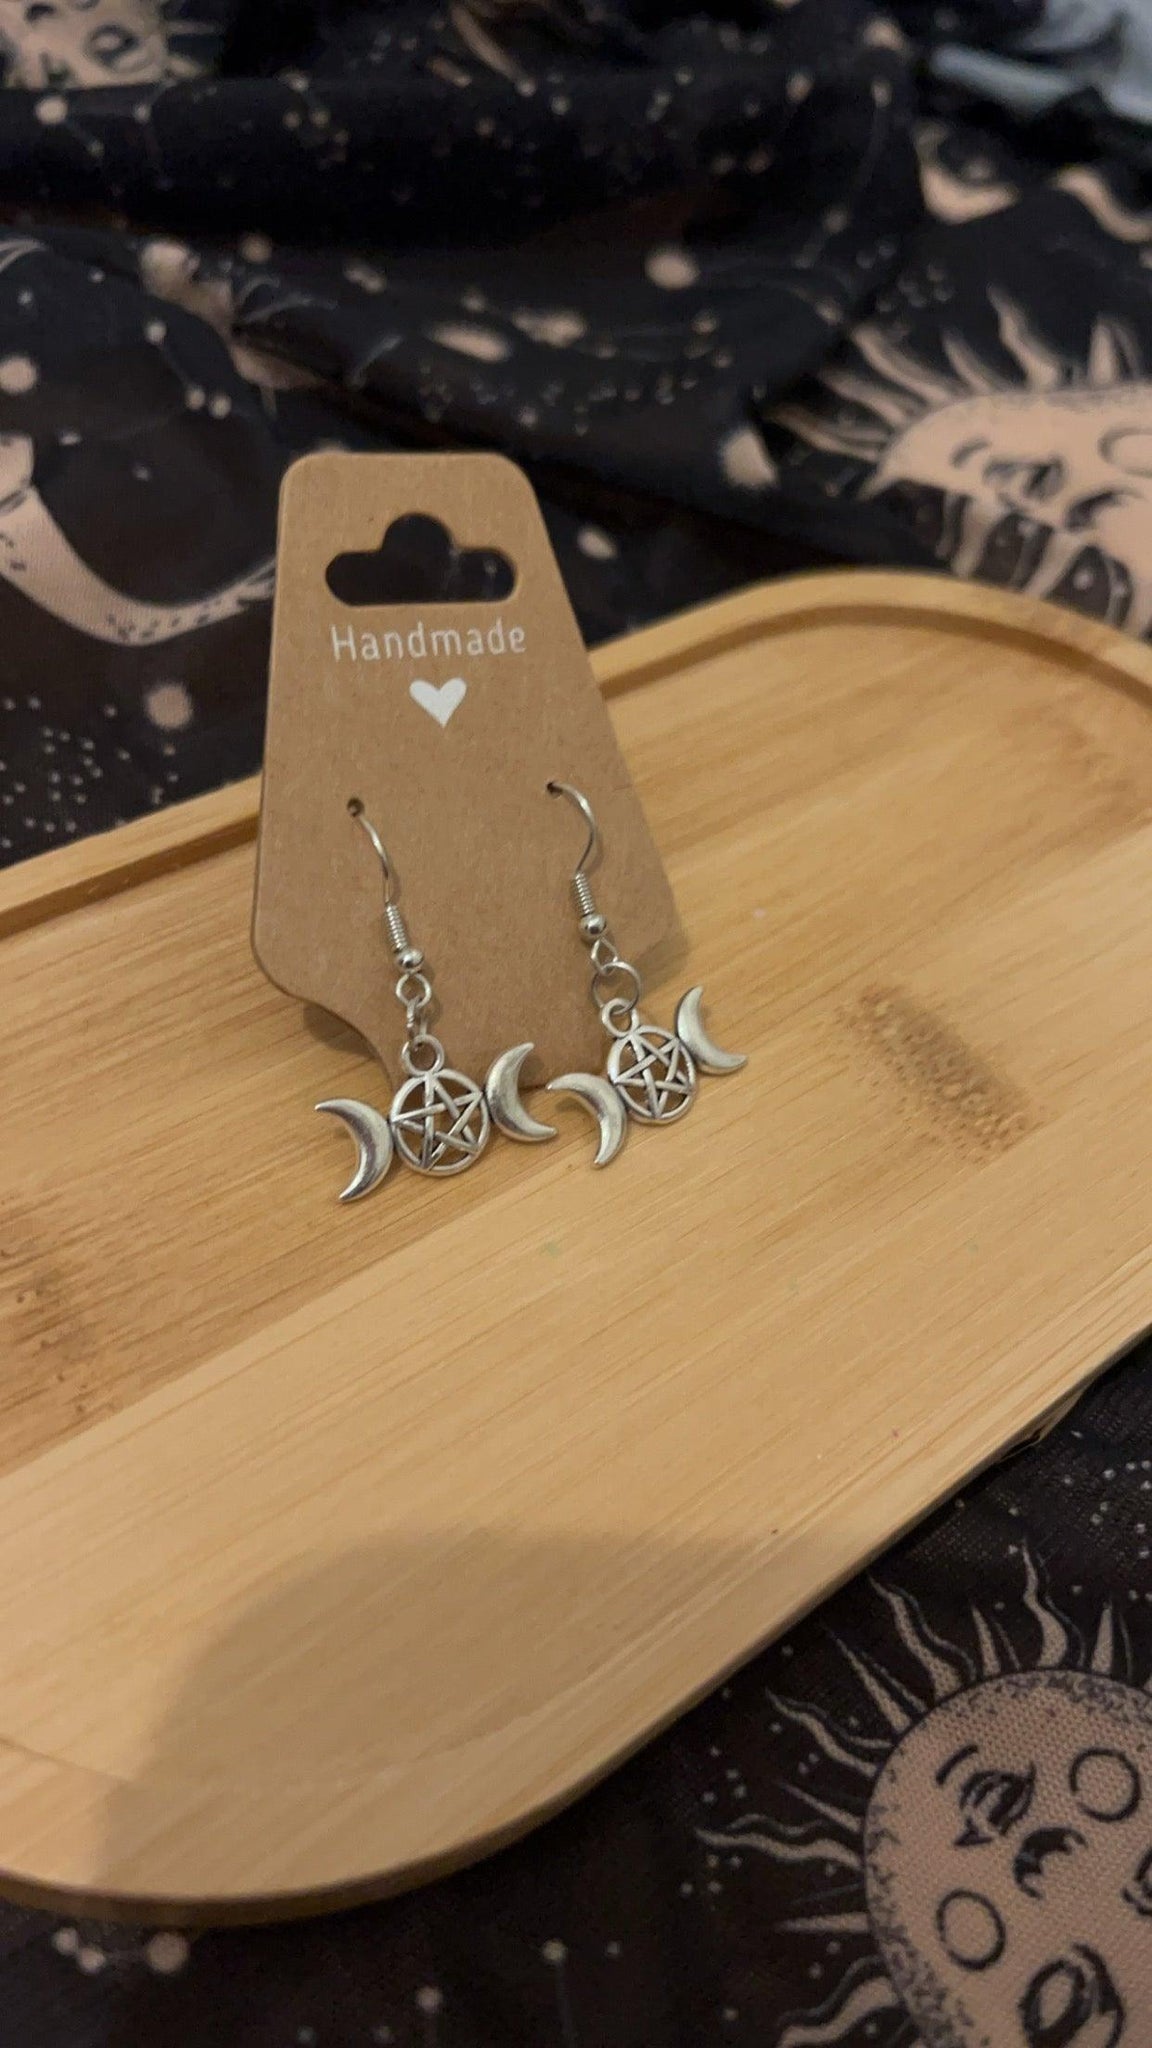 Side angle photo of Drop style silver earrings adorned with triple moon goddess symbol with a pentacle in the middle of the full moon. 